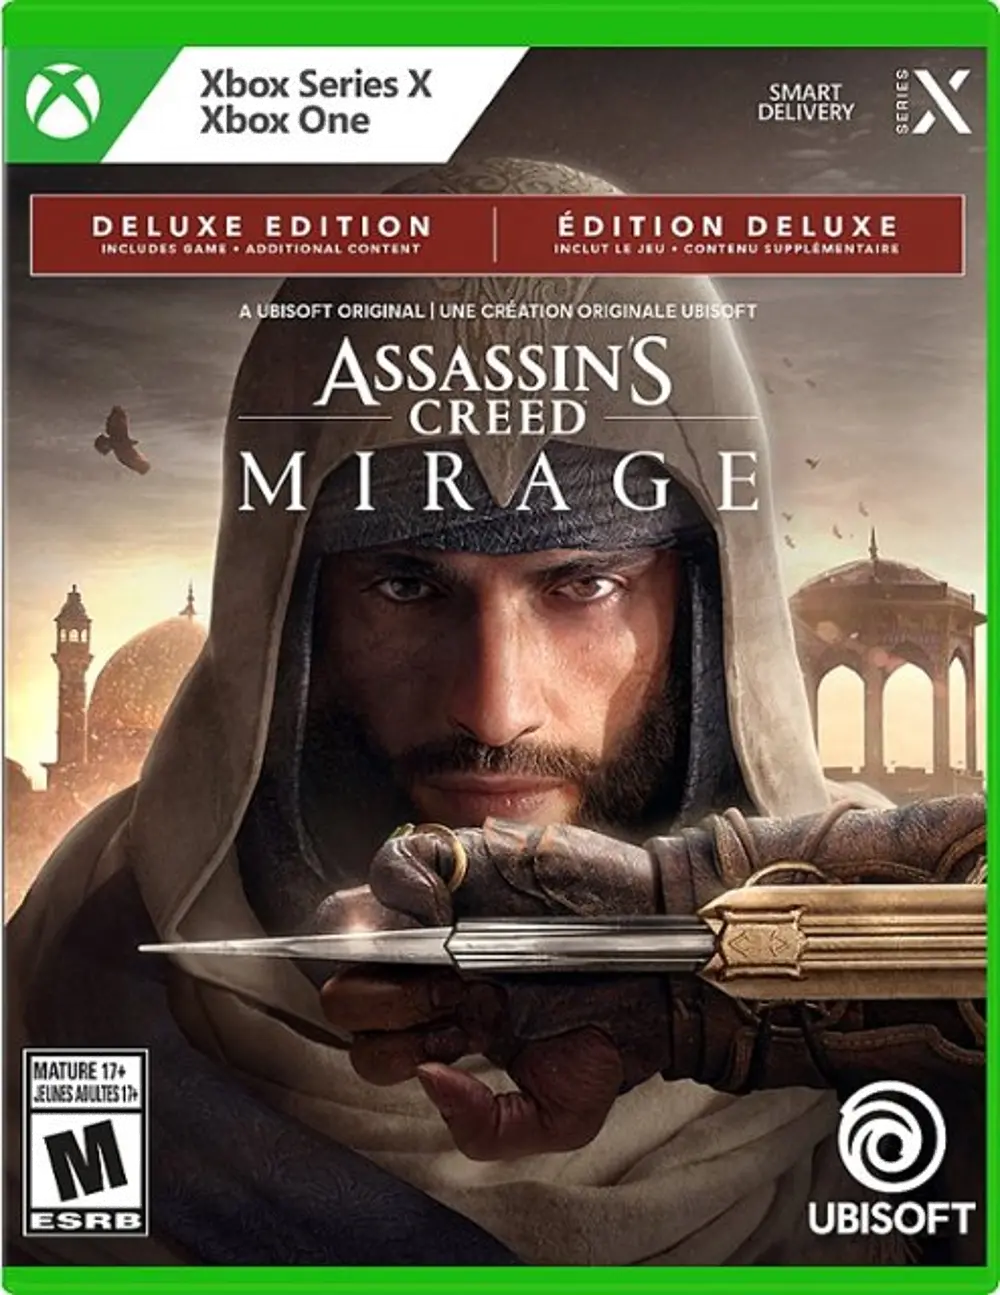 UB412550XB1 Assassin's Creed Mirage Deluxe Edition - Xbox Series X-1